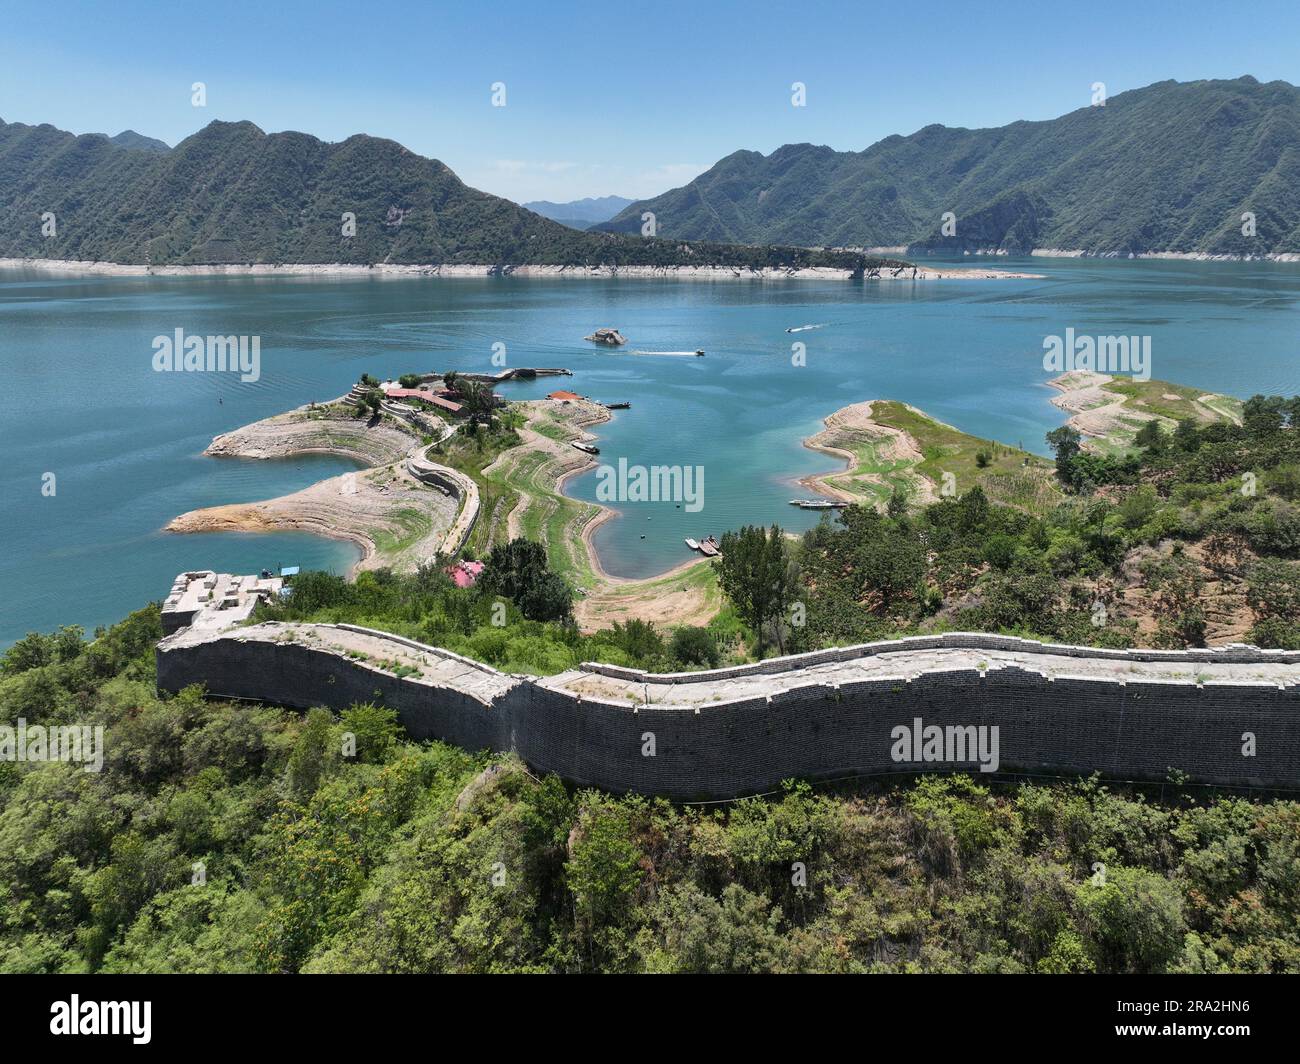 Qianxi. 29th June, 2023. This aerial photo taken on June 29, 2023 shows a partly submerged section of the Great Wall at Panjiakou reservoir in north China's Hebei Province. The Great Wall of China encounters the submersion by water when it meets the Panjiakou reservoir at the border of Qianxi County and Kuancheng Manchu Autonomous County in Hebei Province, creating a unique sight to behold. Credit: Mu Yu/Xinhua/Alamy Live News Stock Photo